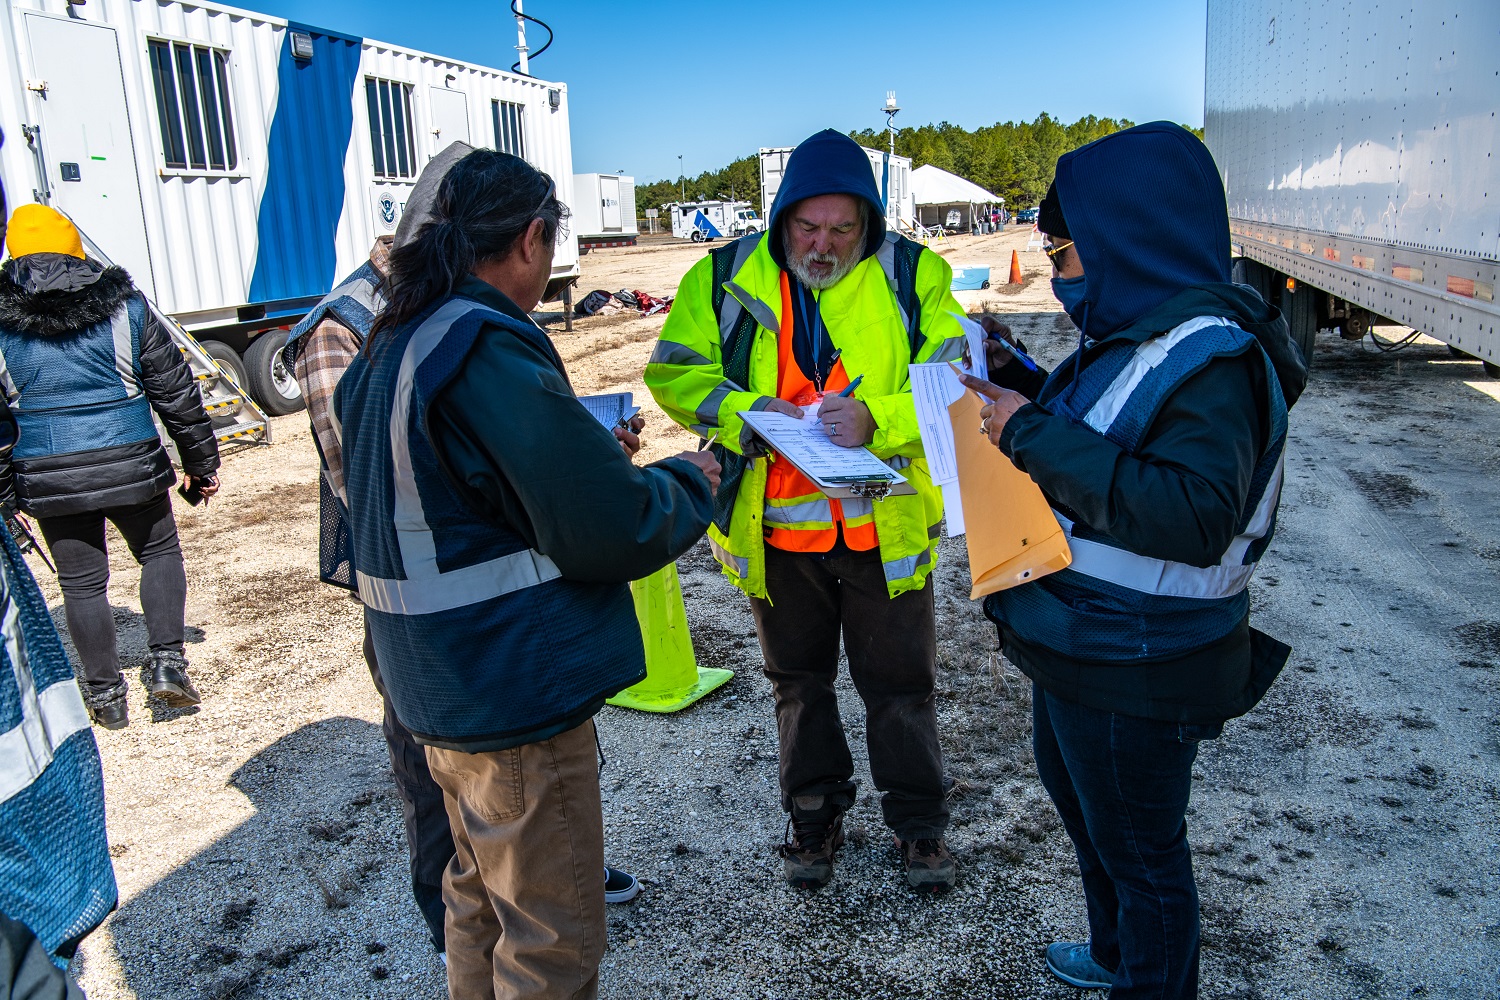 Employees in FEMA safety vests on a cold day